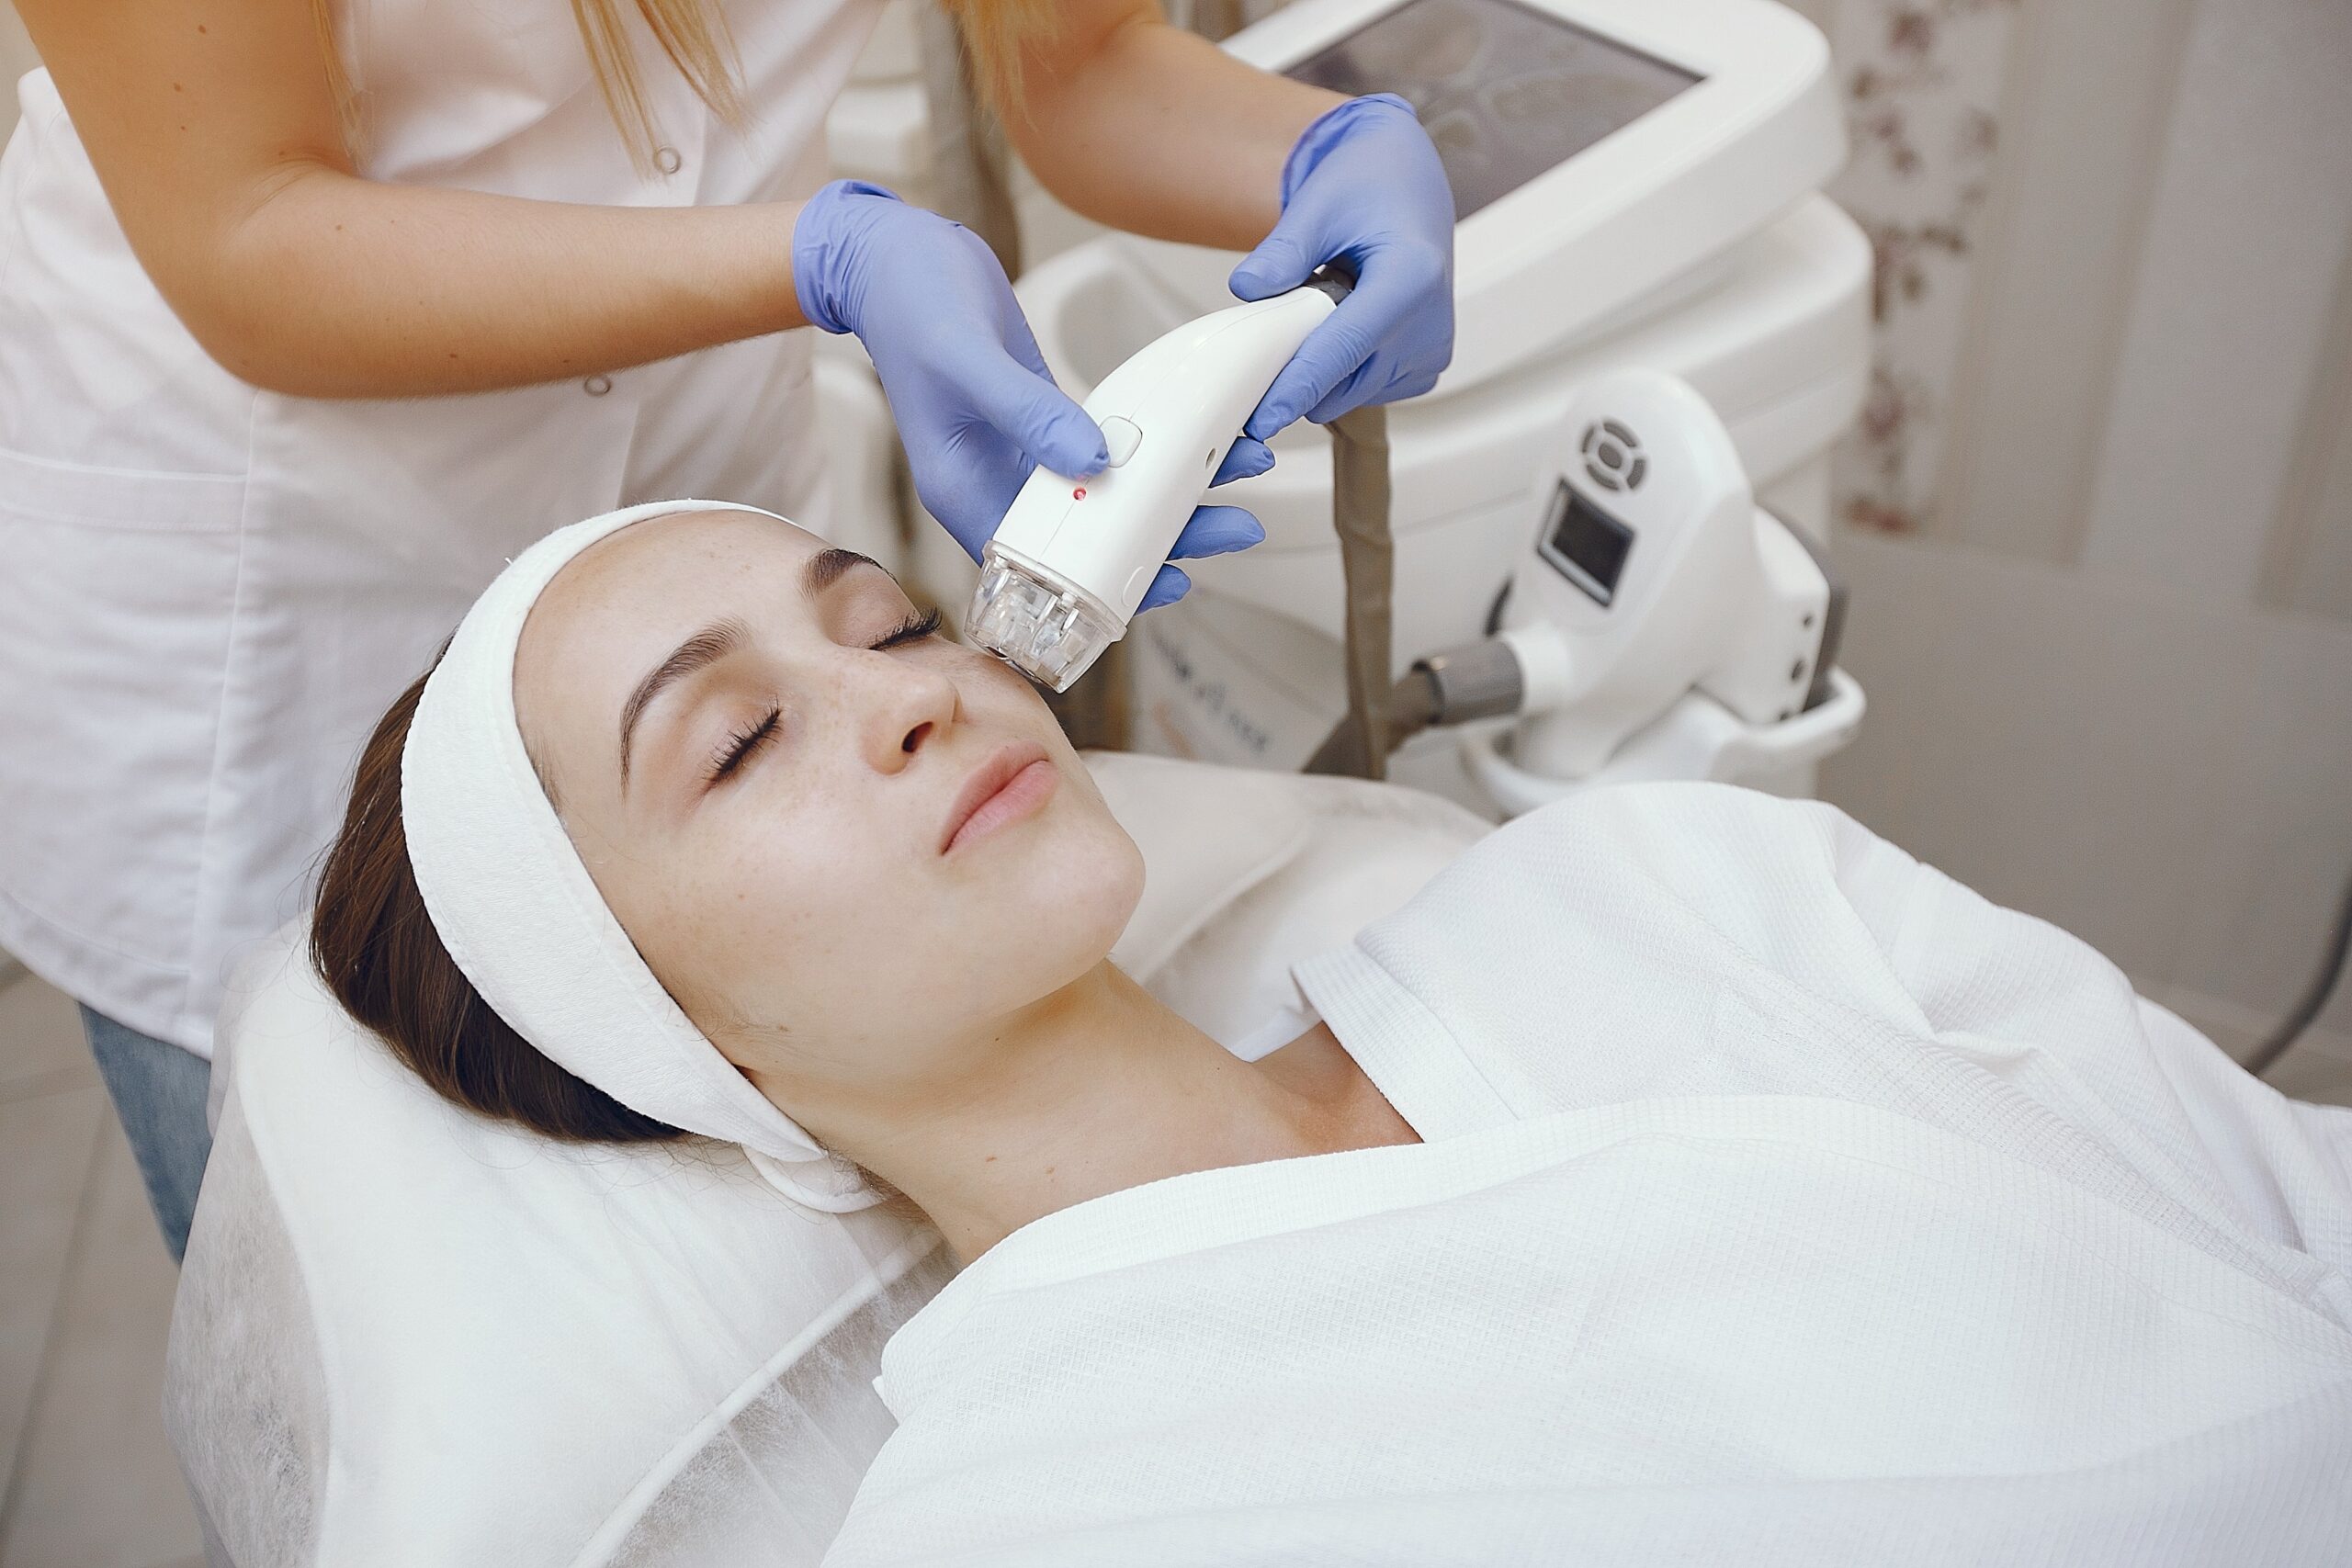 The Best Preferred Laser Treatments for the Face